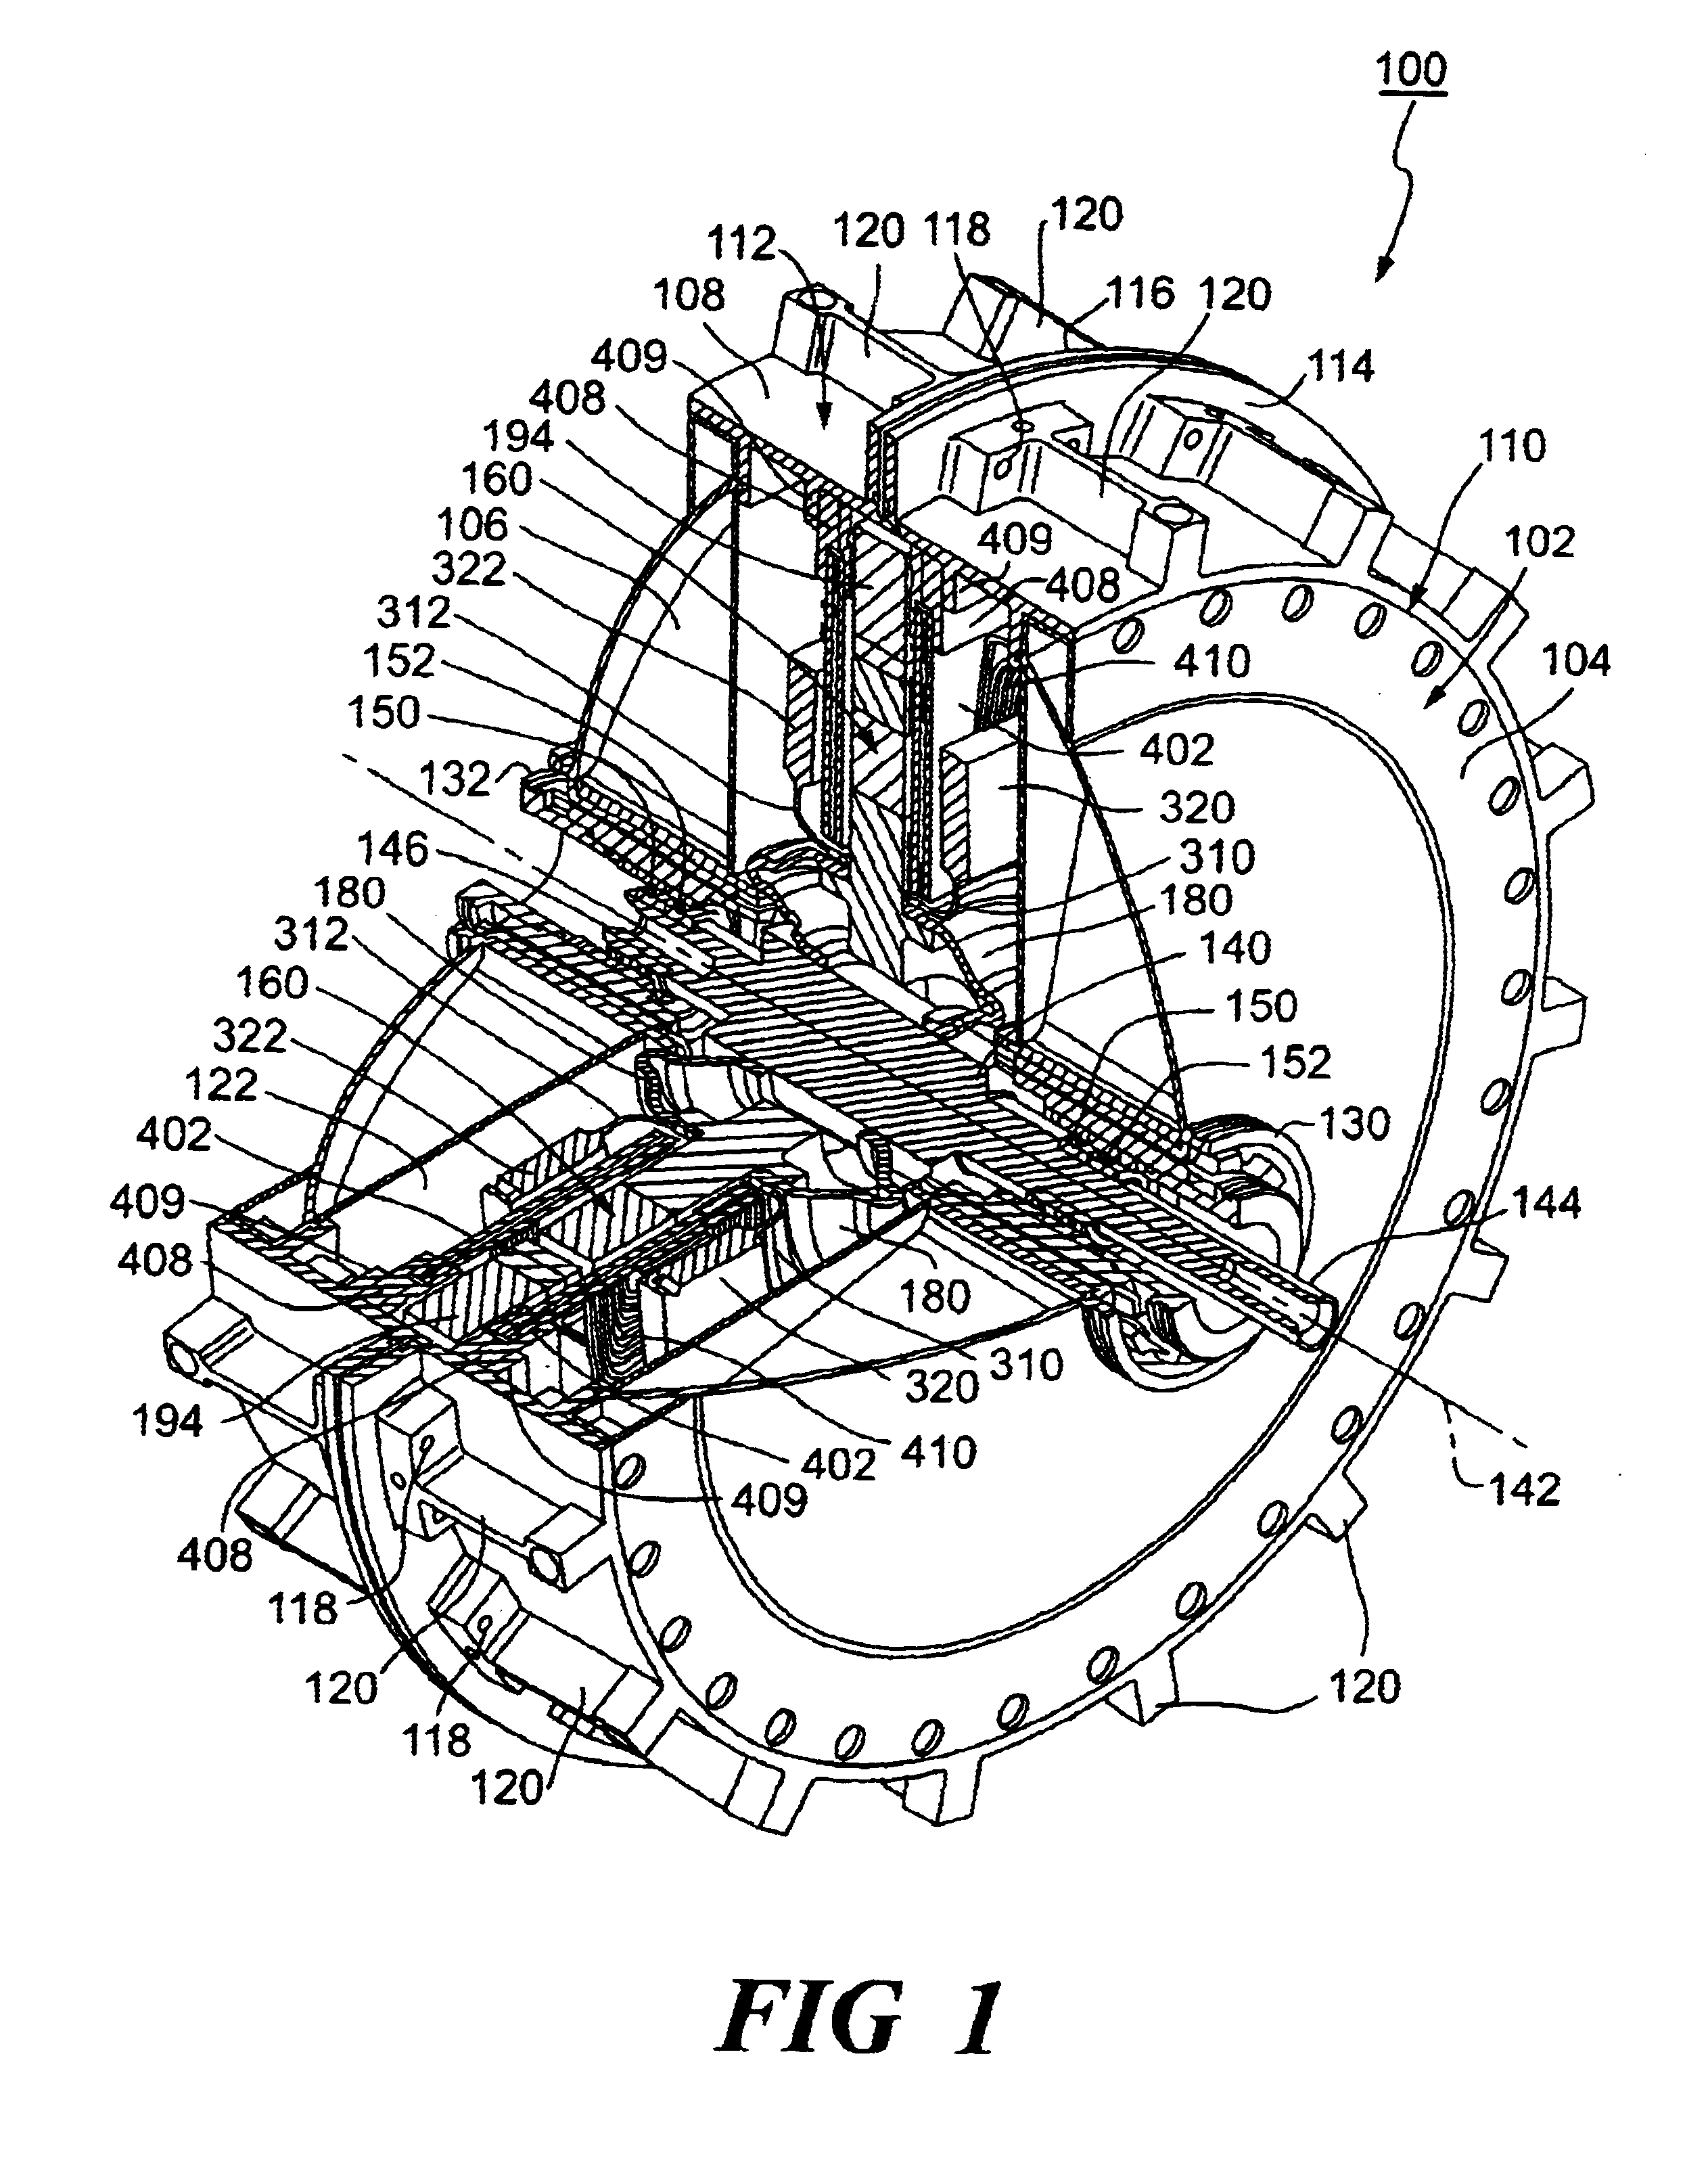 Axial gap motor-generator for high speed operation